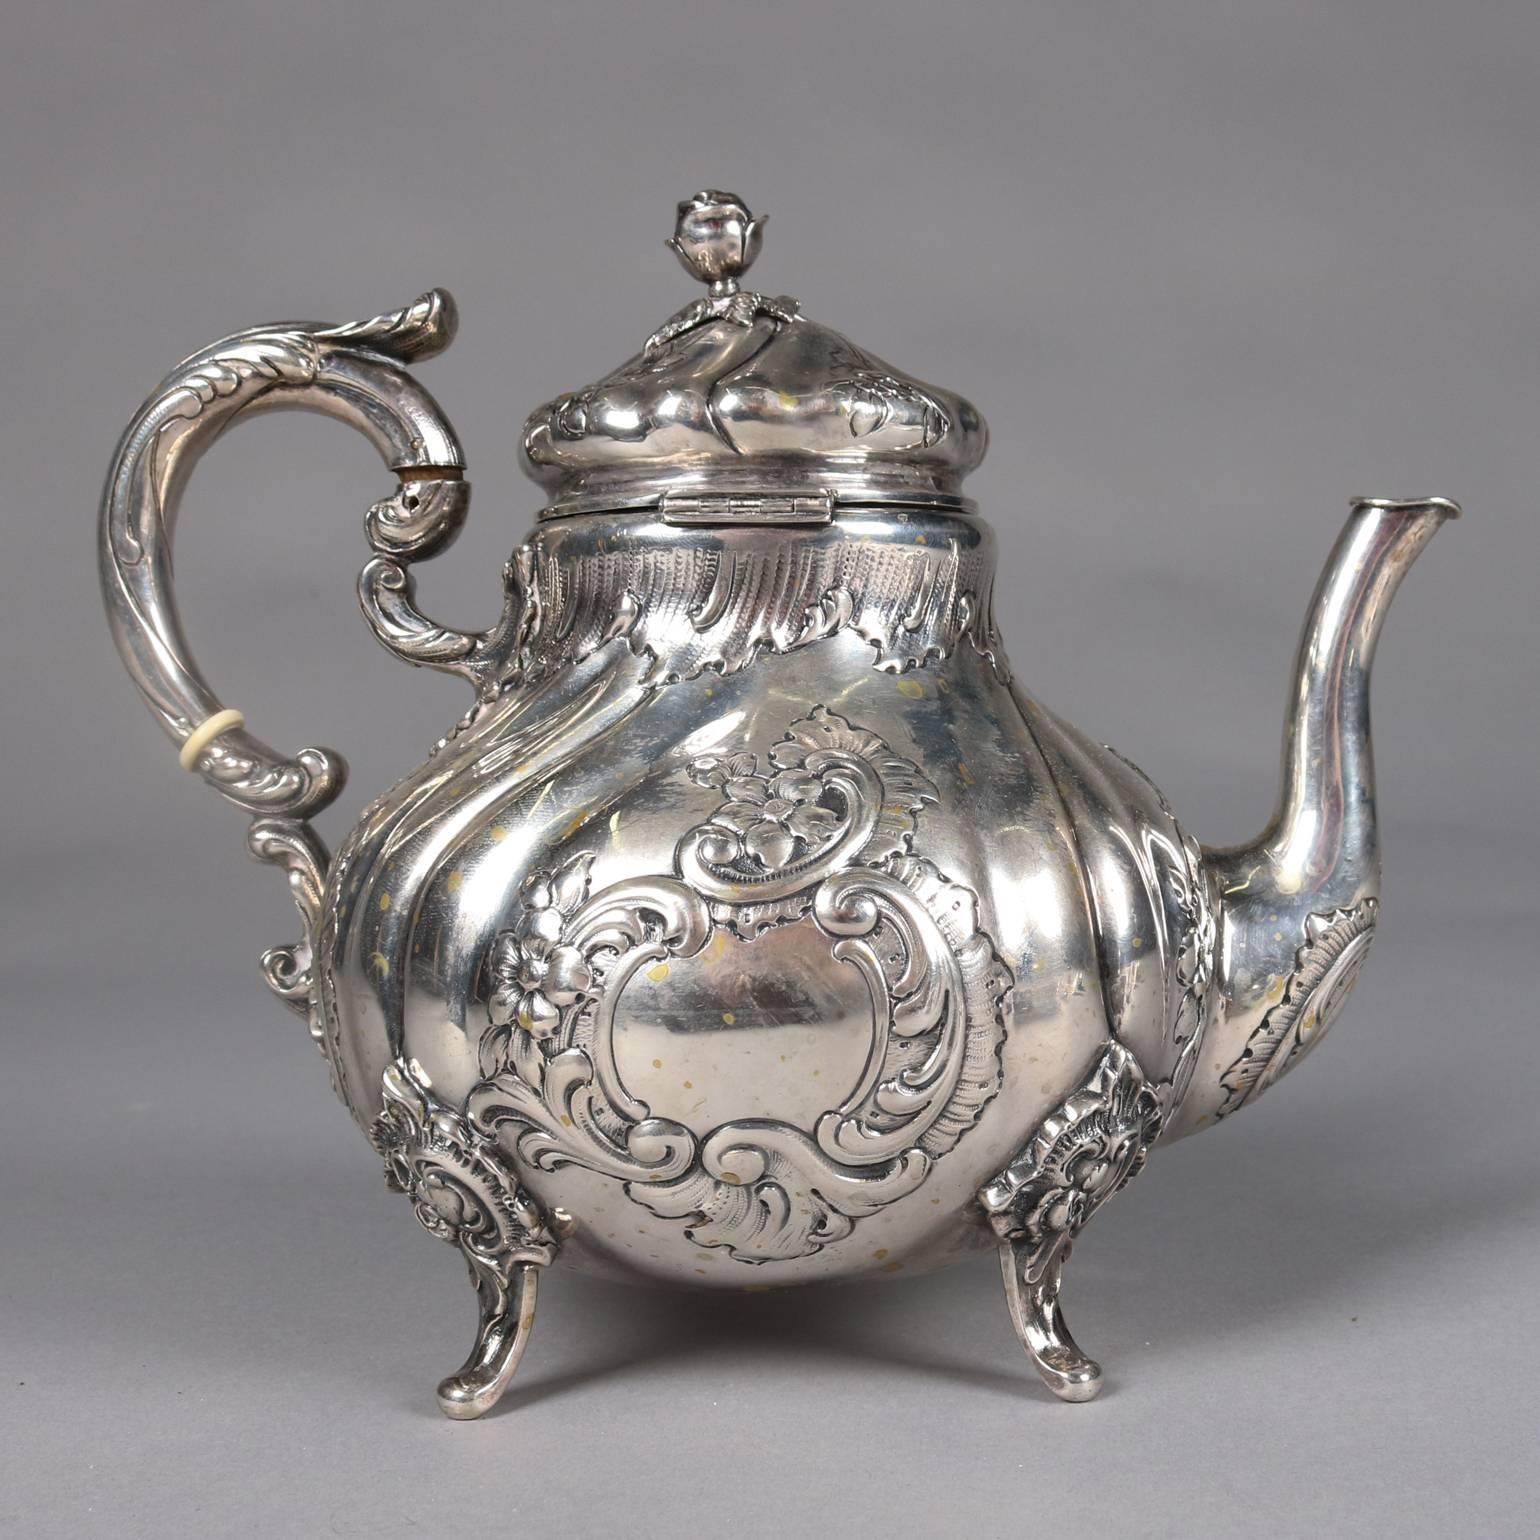 Antique .800 silver footed teapot, gadroon and foliate decorated with rose finial, marked .800, 19th century.

Measures: 8" H x 9" W x 6" D.